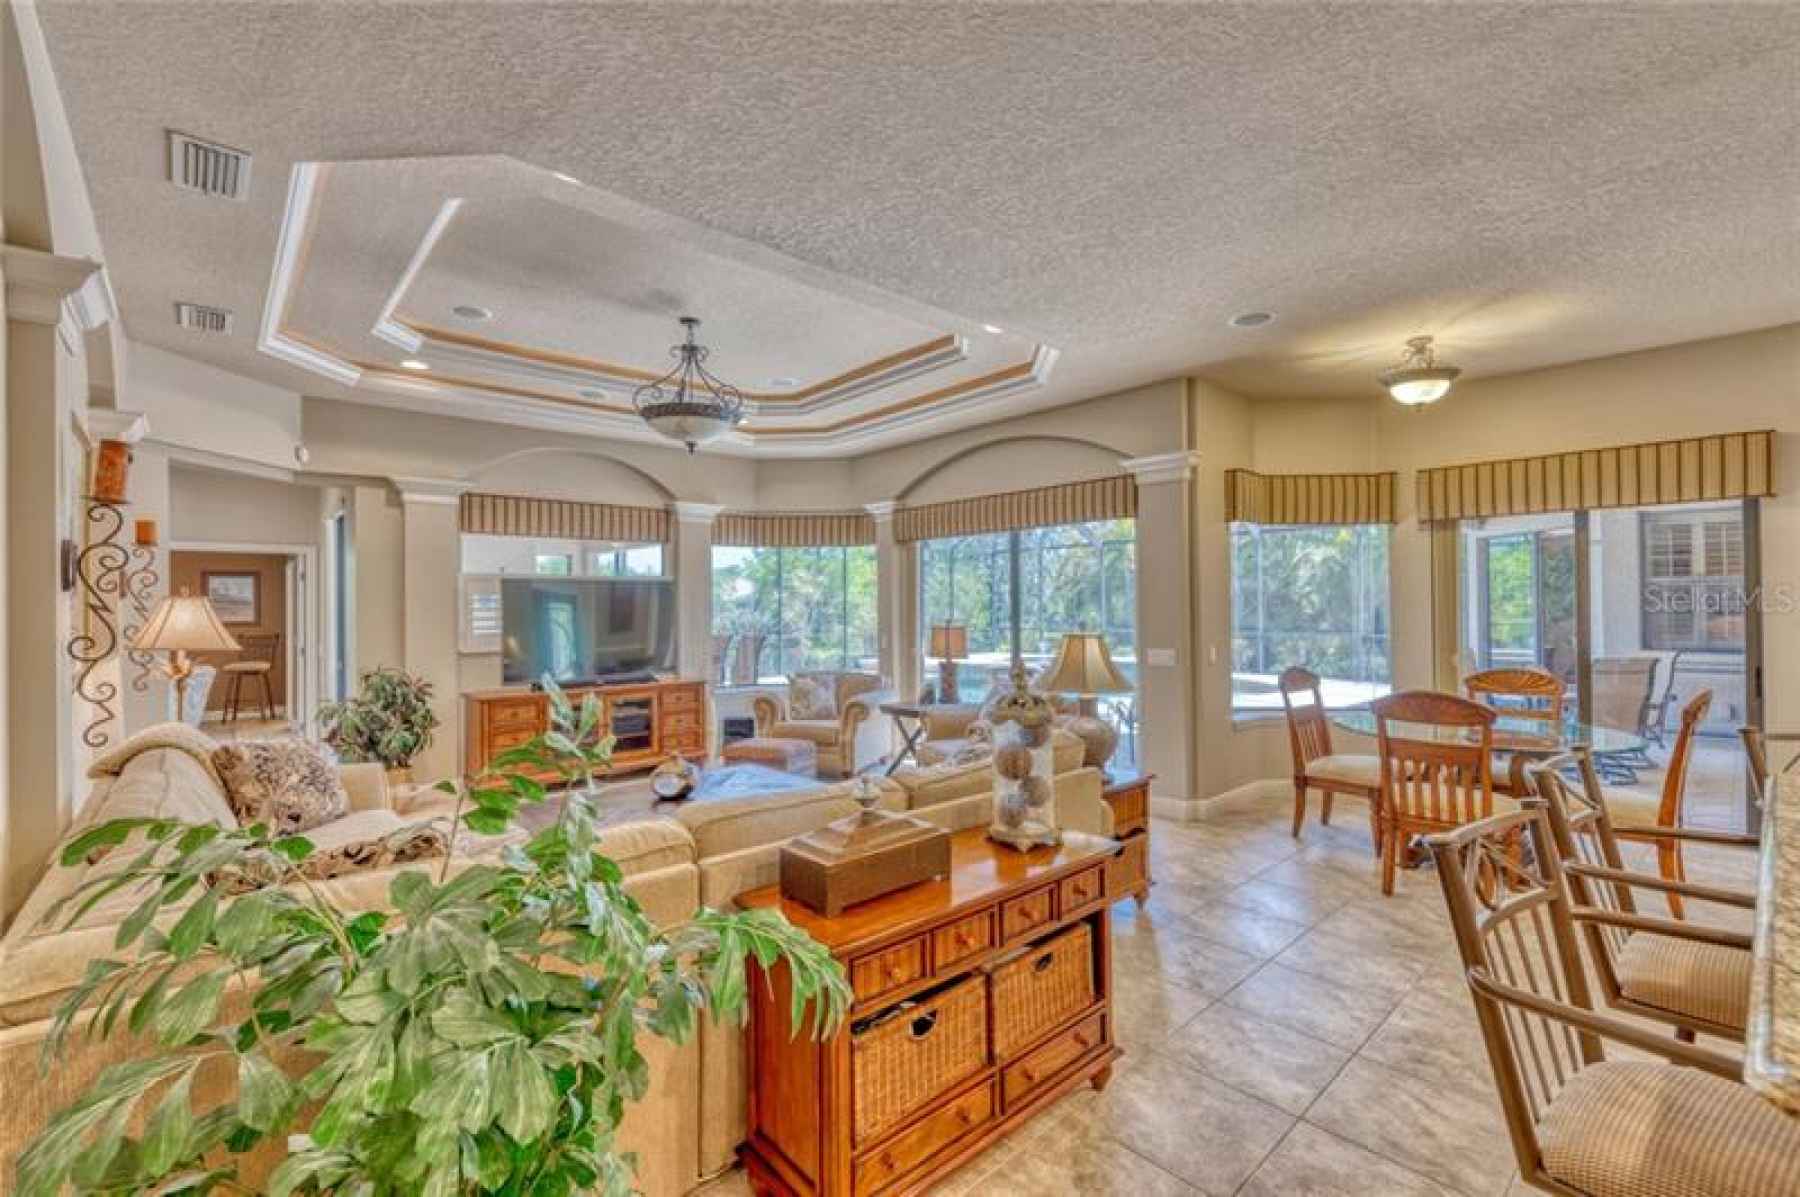 Large, open concept Family Room, Kitchen, Breakfast nook... all leading out to the pool/lanai with s